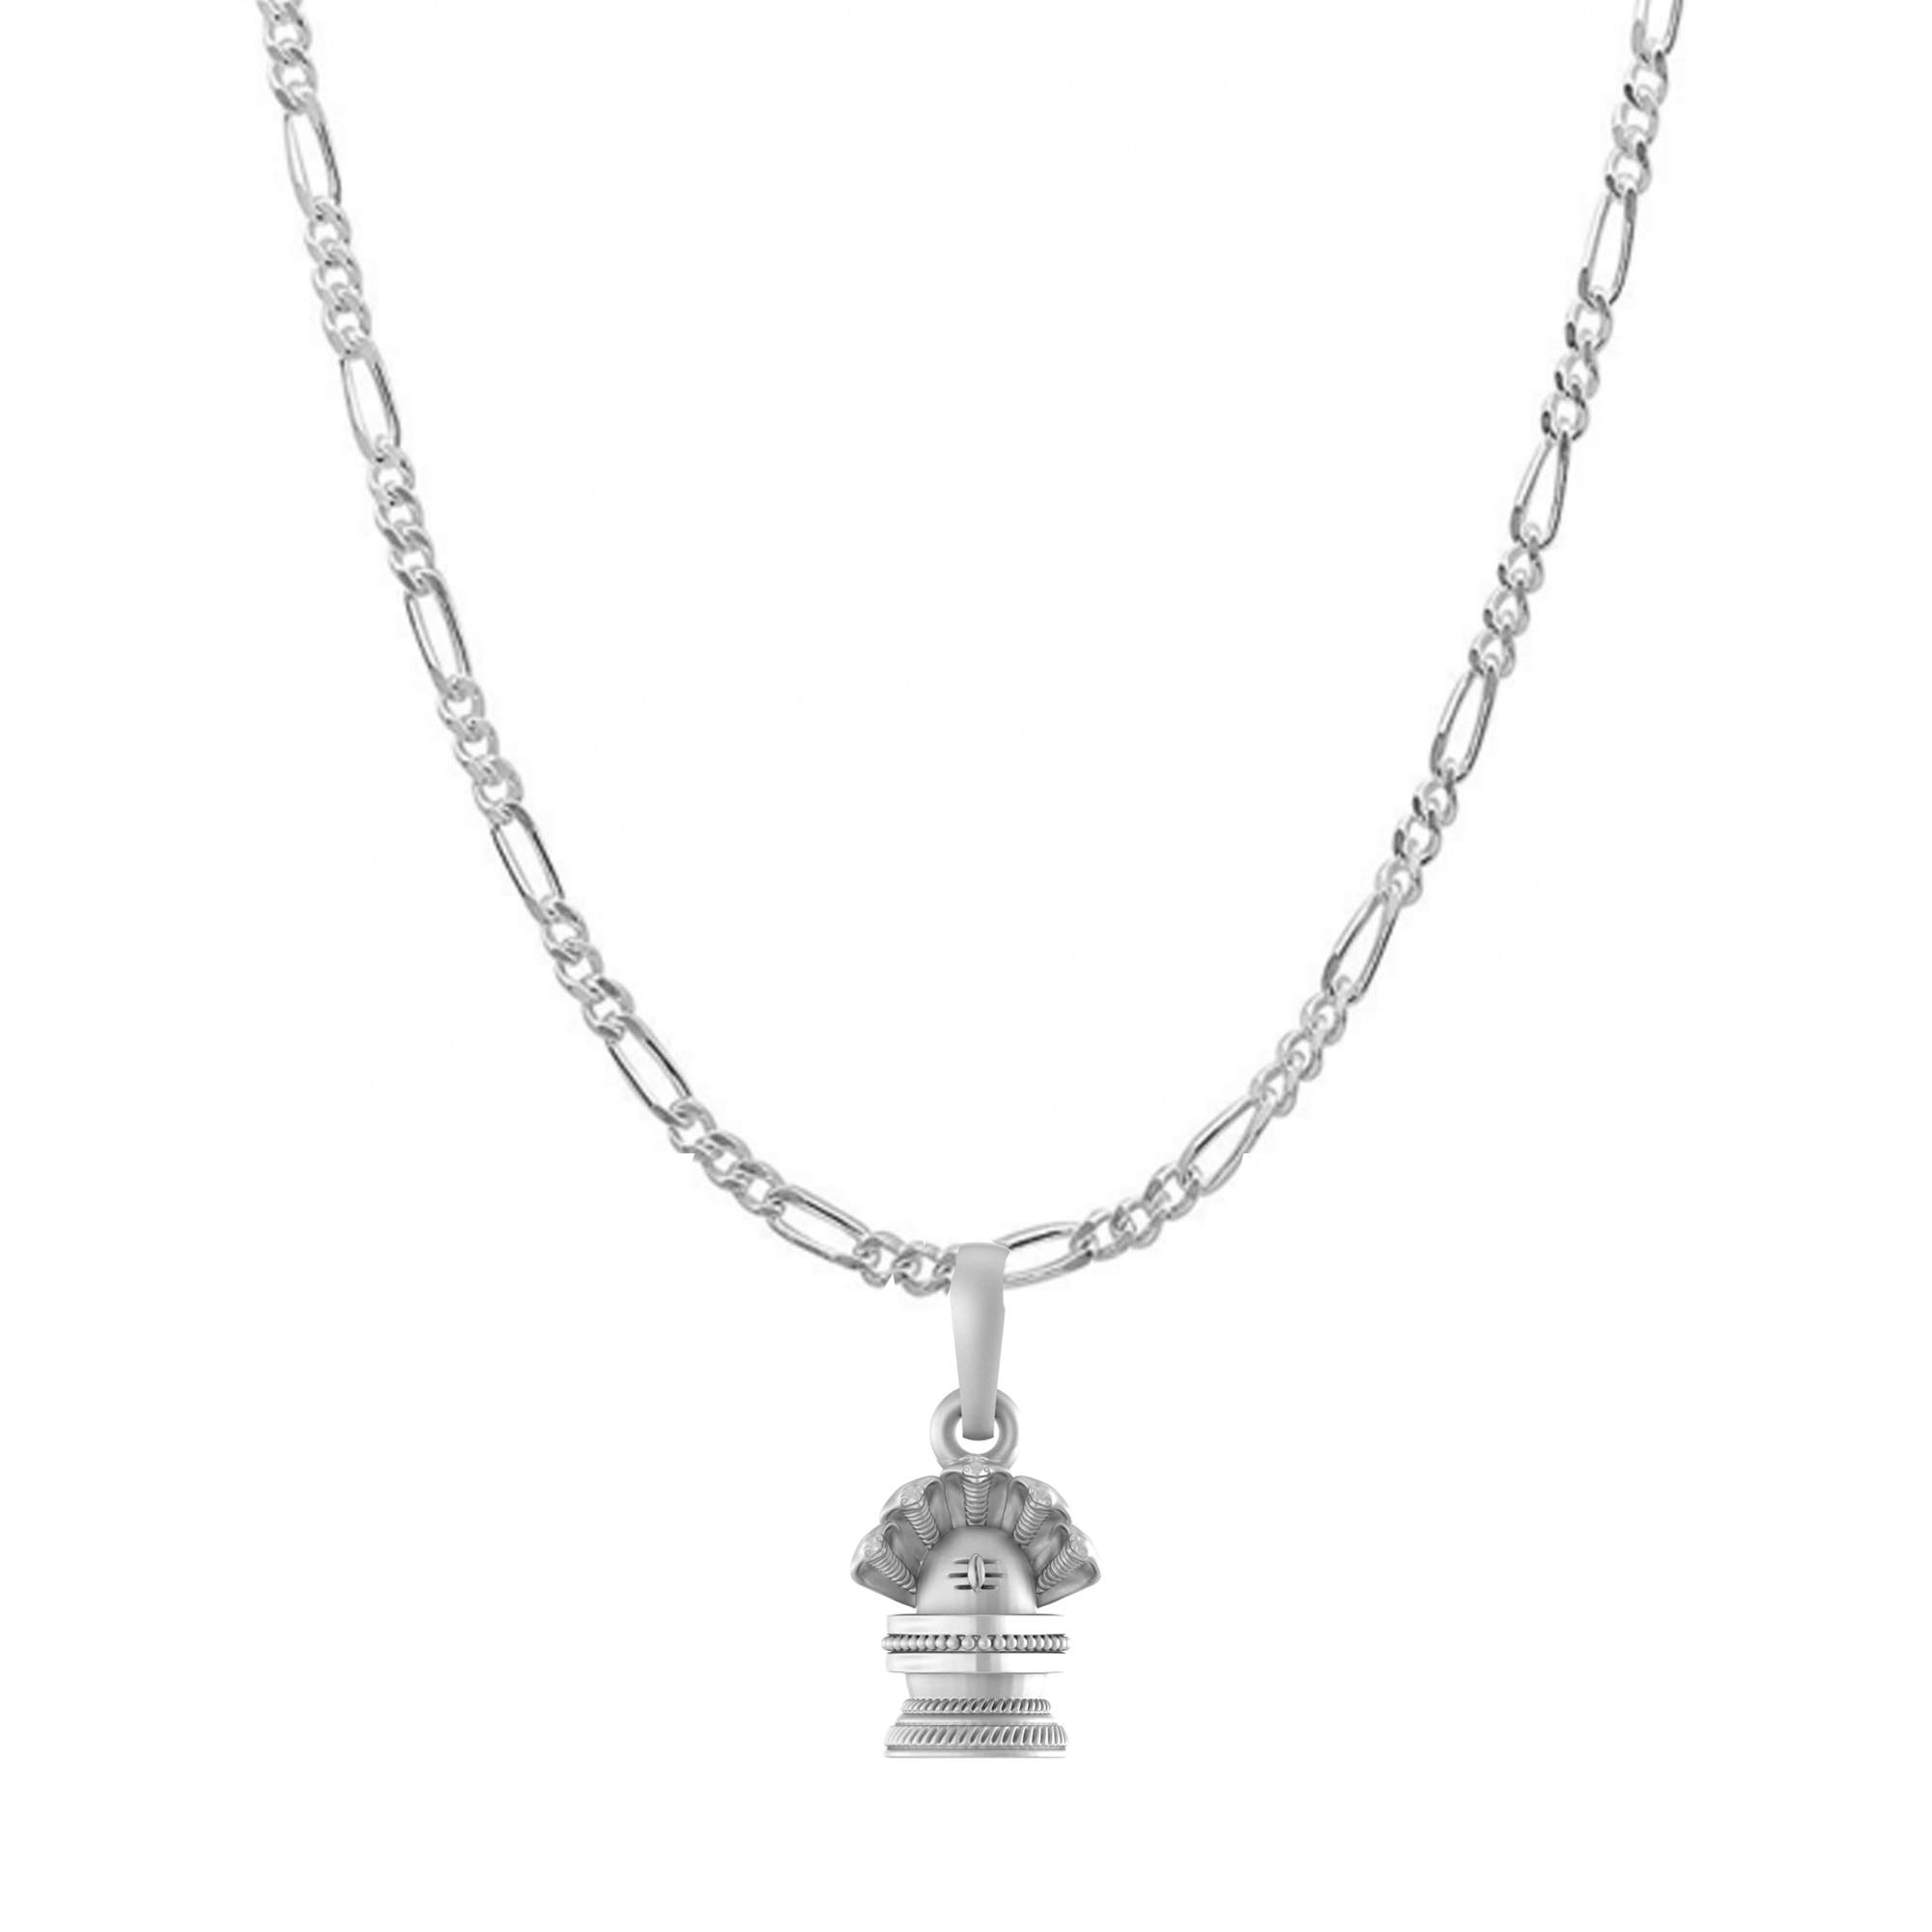 Akshat Sapphire Sterling Silver (92.5% purity) God Shivling Chain Pendant (Pendant with Figaro Chain) for Men Pure Silver Lord Shiva Linga Chain Locket for Good Health & Wealth